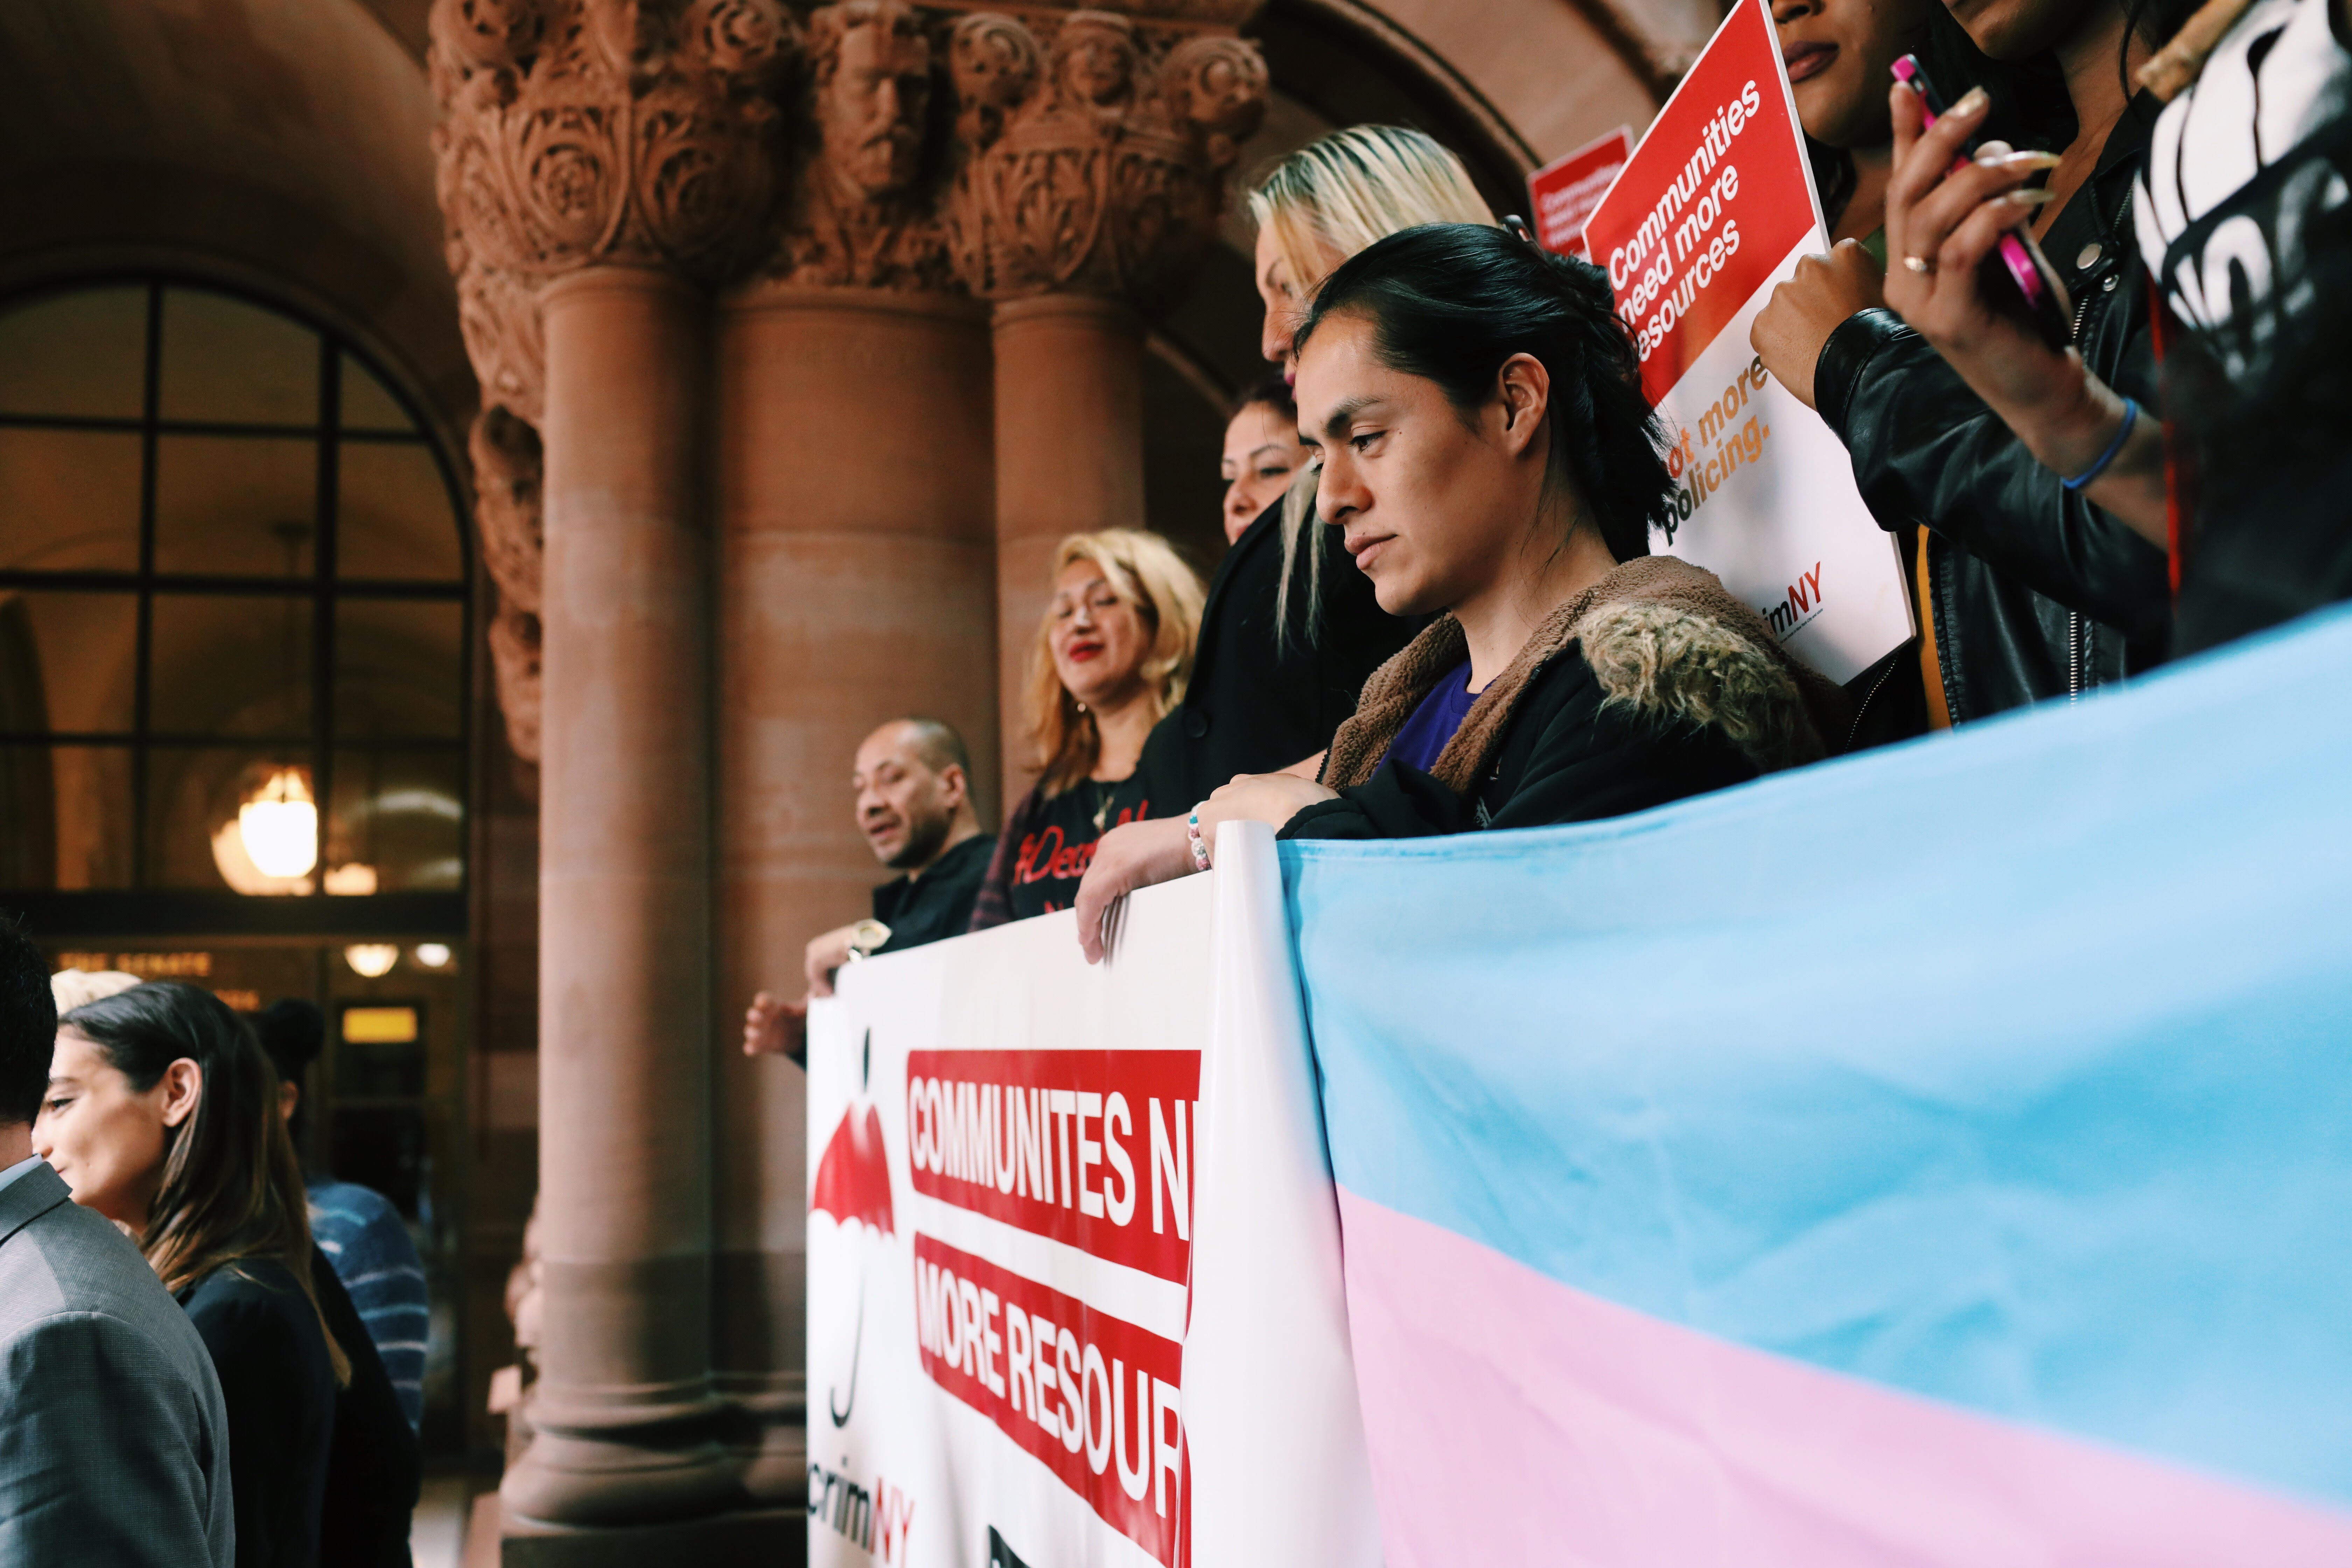 Current and former sex workers, trafficking survivors, and advocates gathered in Albany on Tuesday to support decriminalizing sex work.